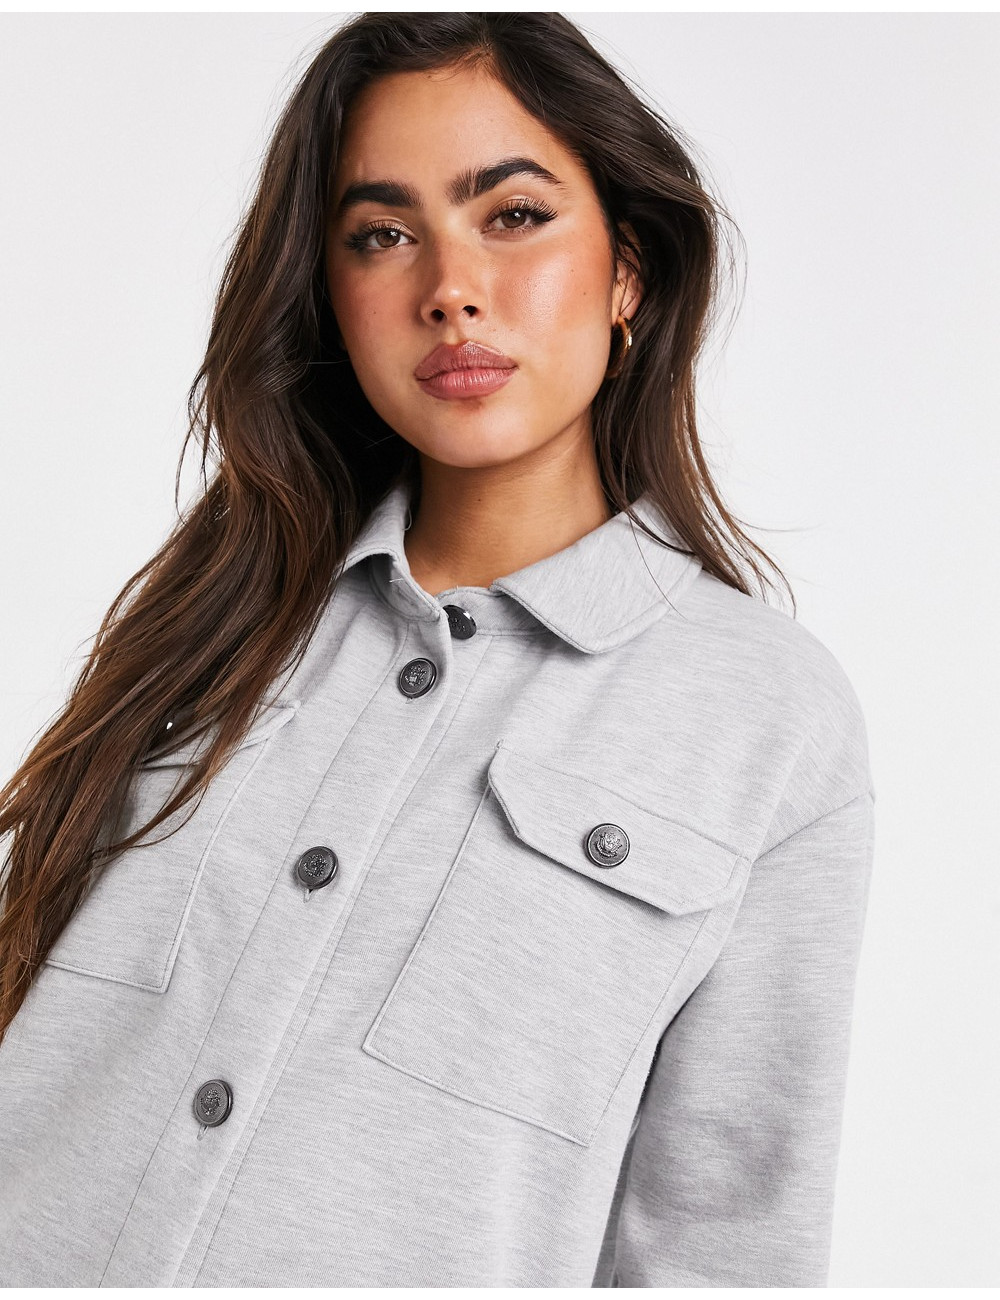 River Island button up...